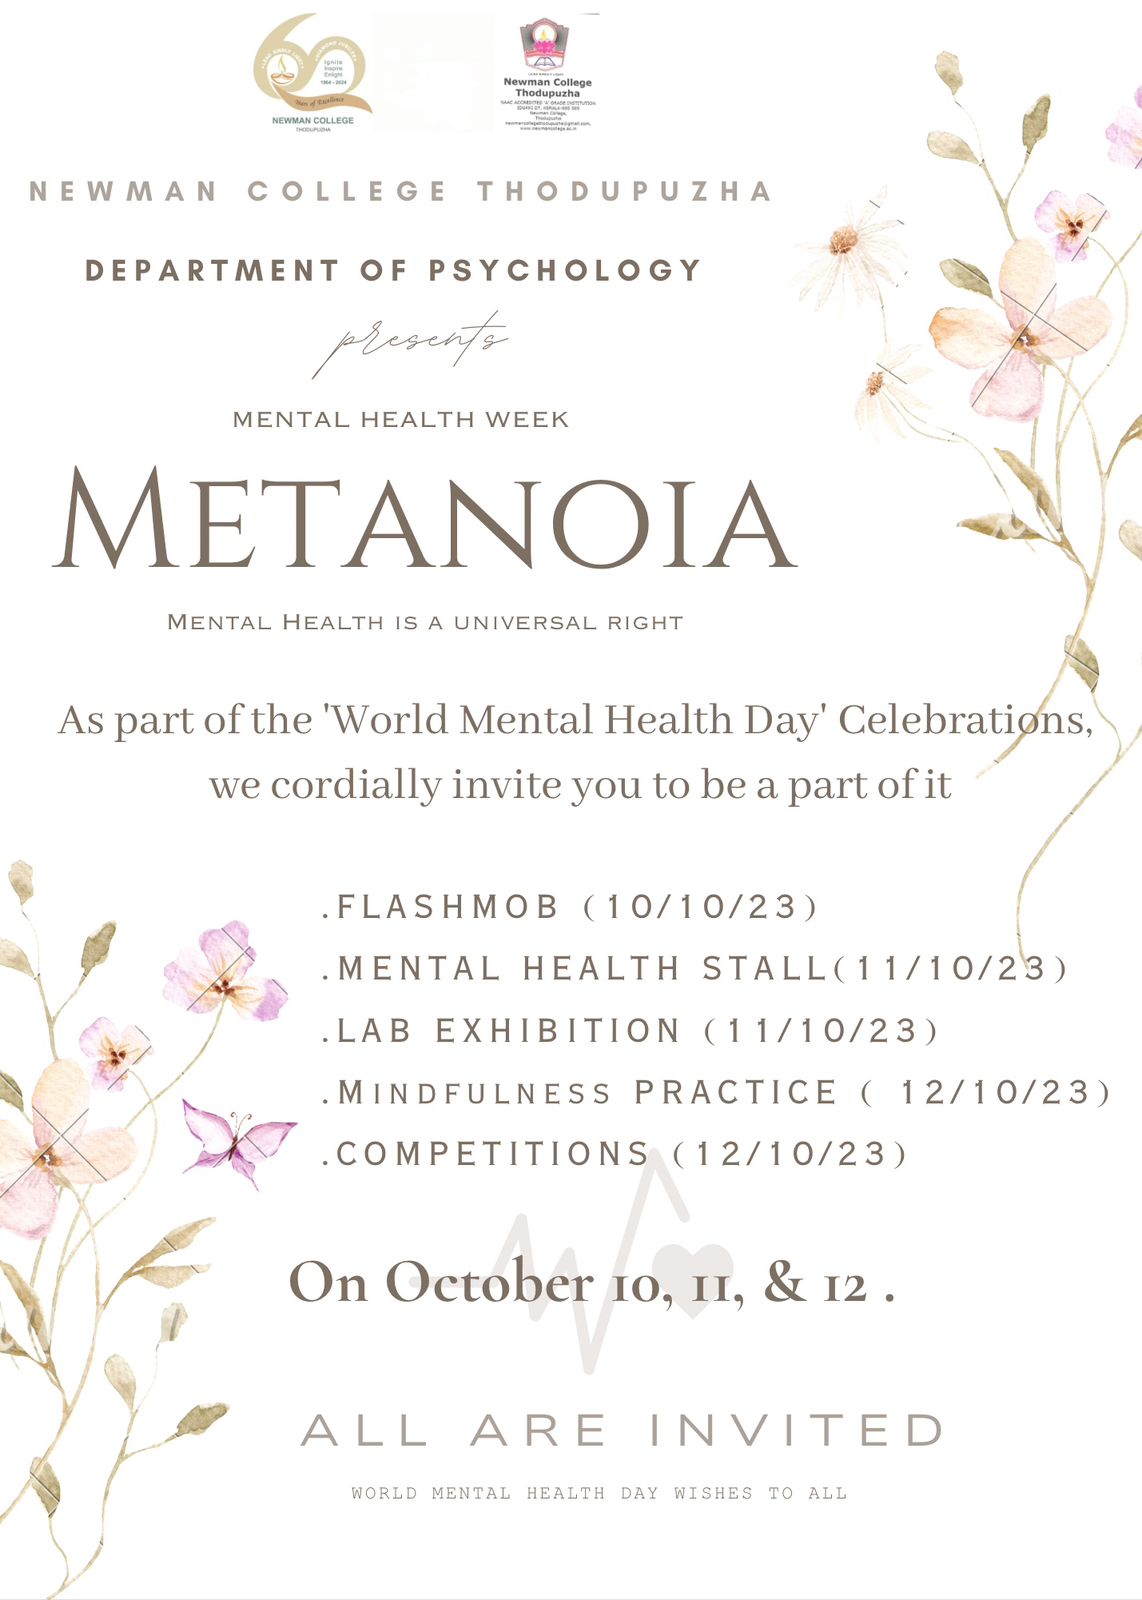 METANOIA: Mental Health is a Universal Right